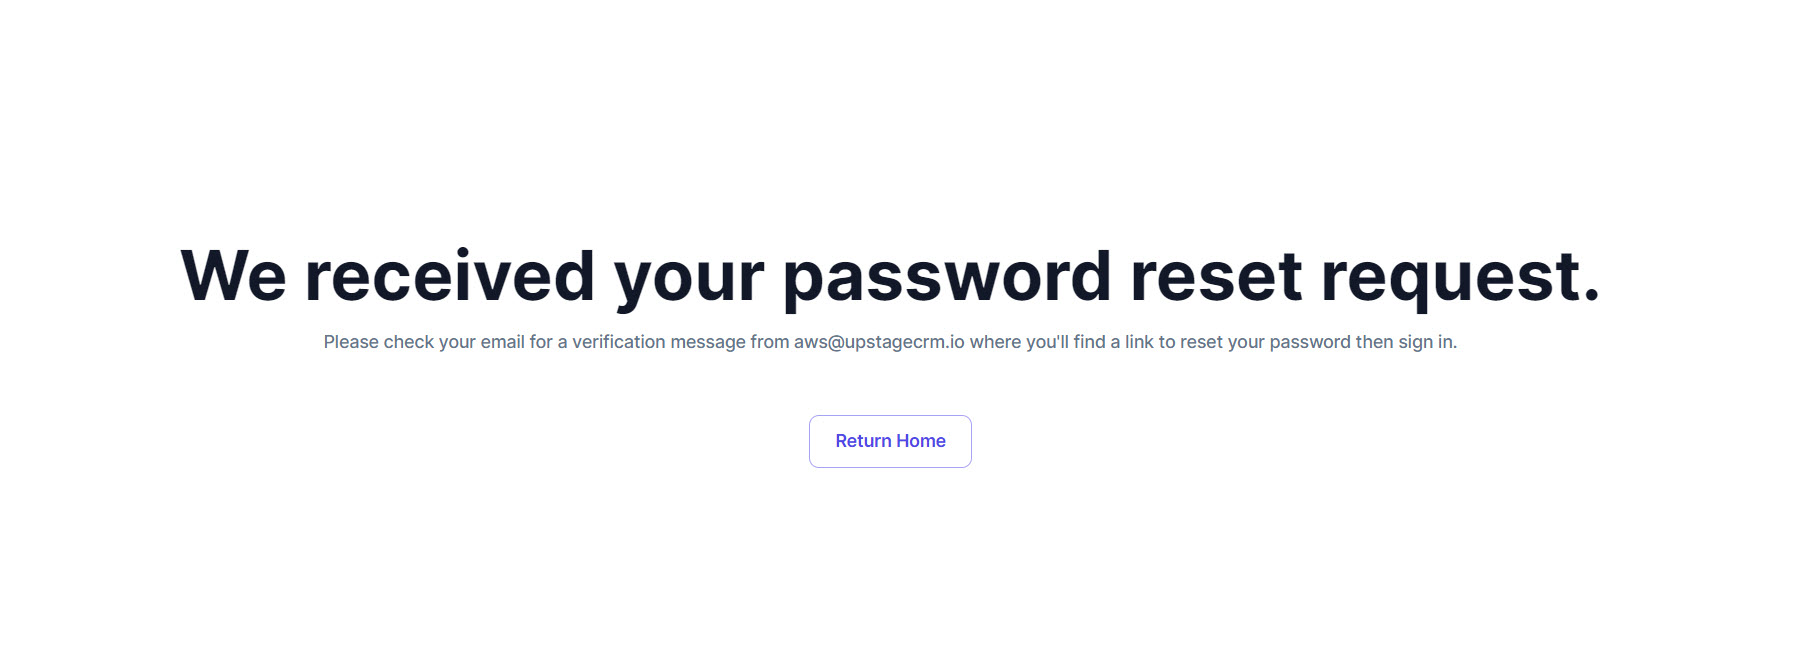 A screenshot of a page that reads "We received your password reset request."